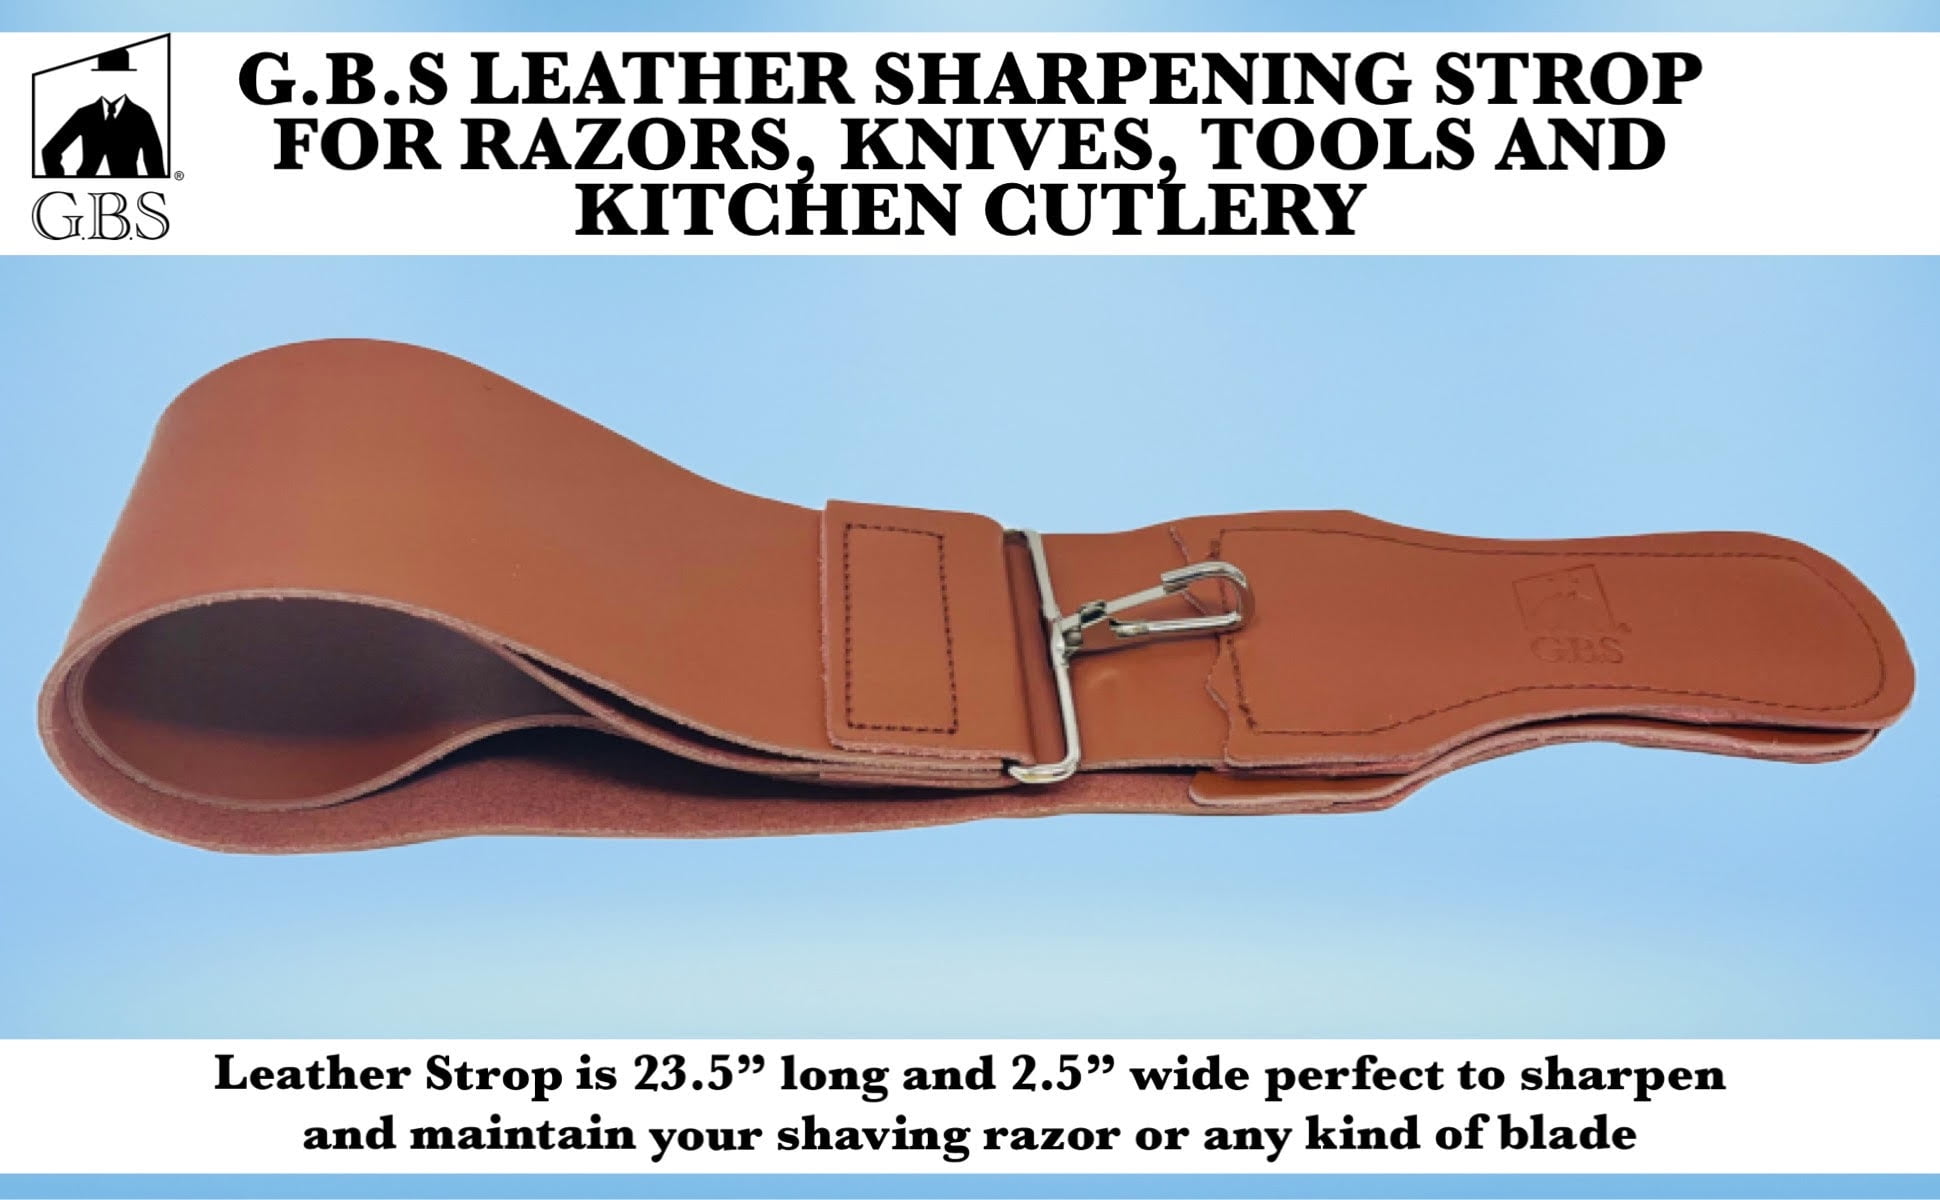 Leather Strop for Straight Razor Sharpening and Smooth - Professional Straight Razor Knife Cowhide Dual Strop Professional Quality Sharpening